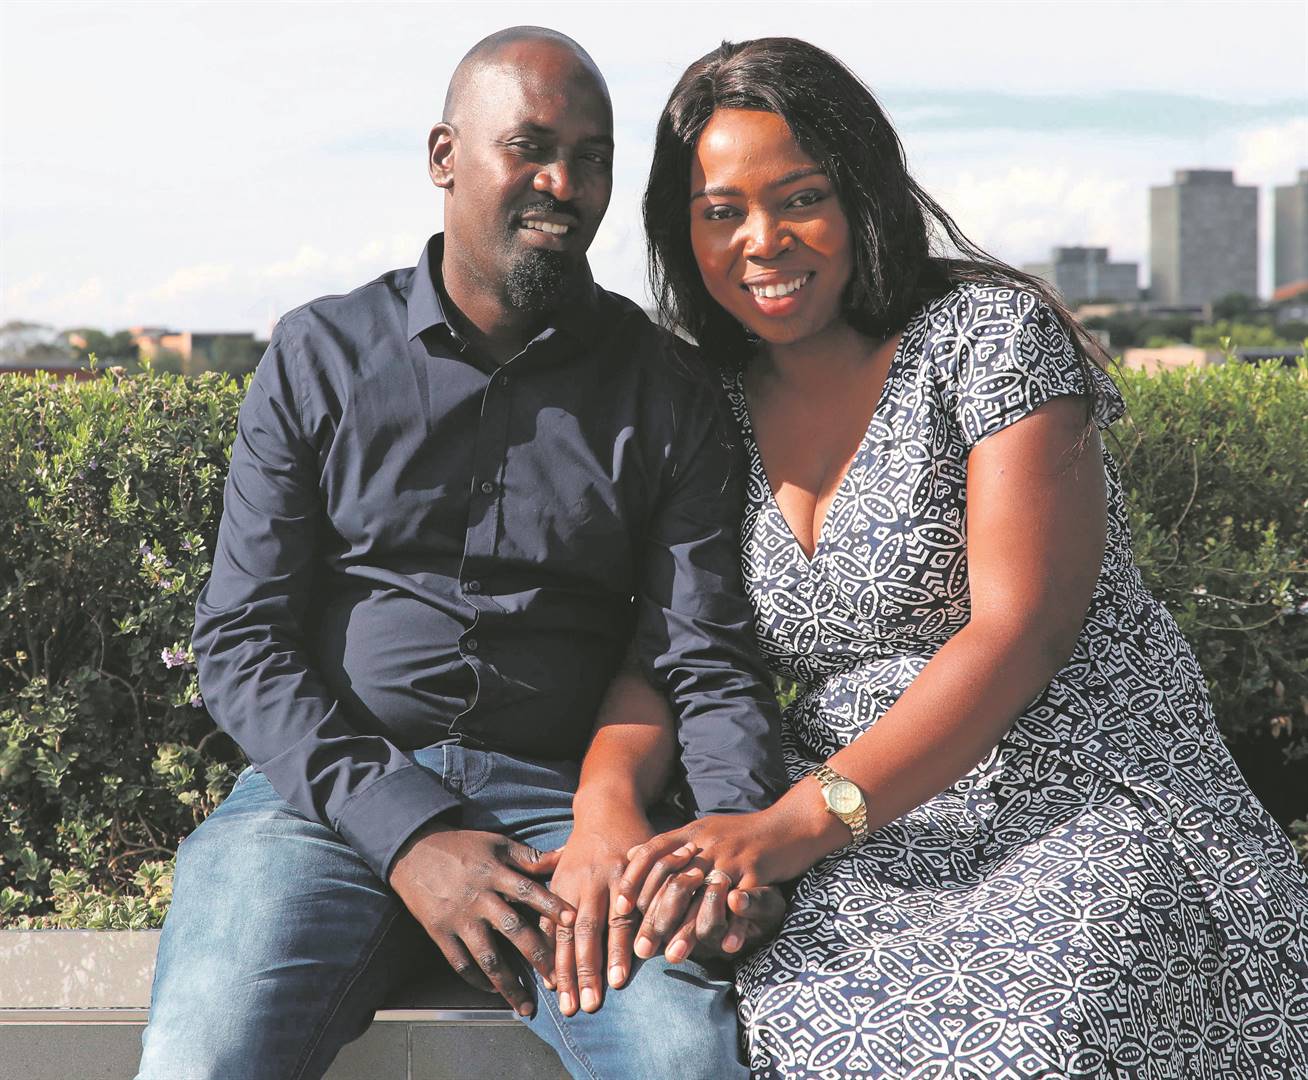 Hector Mkansi and his fiance Nonhlanhla Soldaat who captured the country’s attention when he proposed at KFC. They will wed on New Year’s Eve, thanks to Mzansi’s generosity              Picture: Thulani Mbele